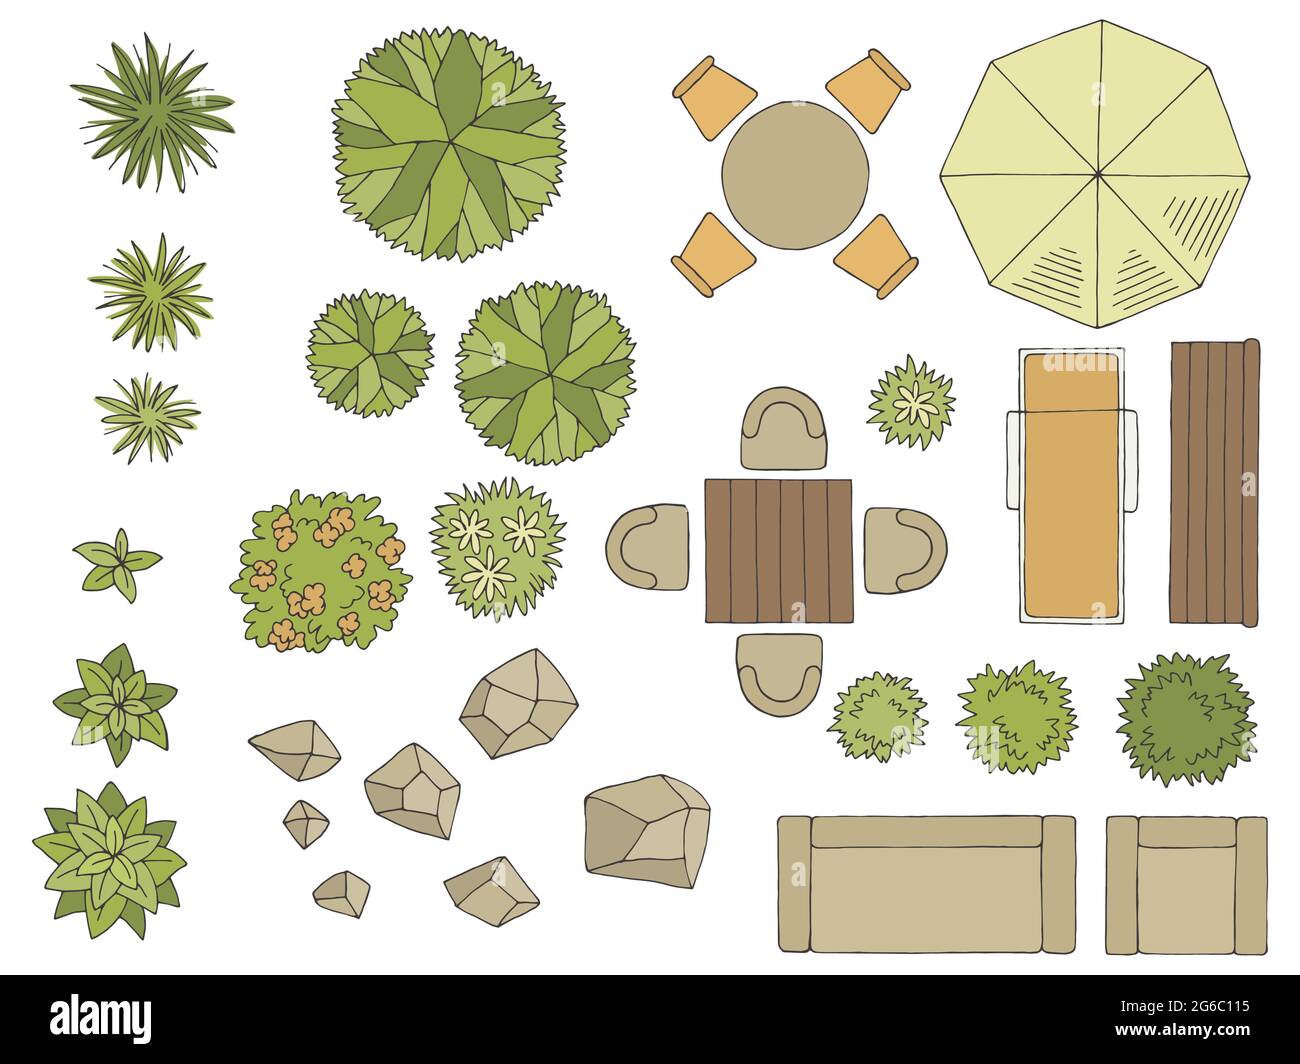 Landscape architect design element set graphic color top sketch aerial view isolated illustration vector Stock Vector